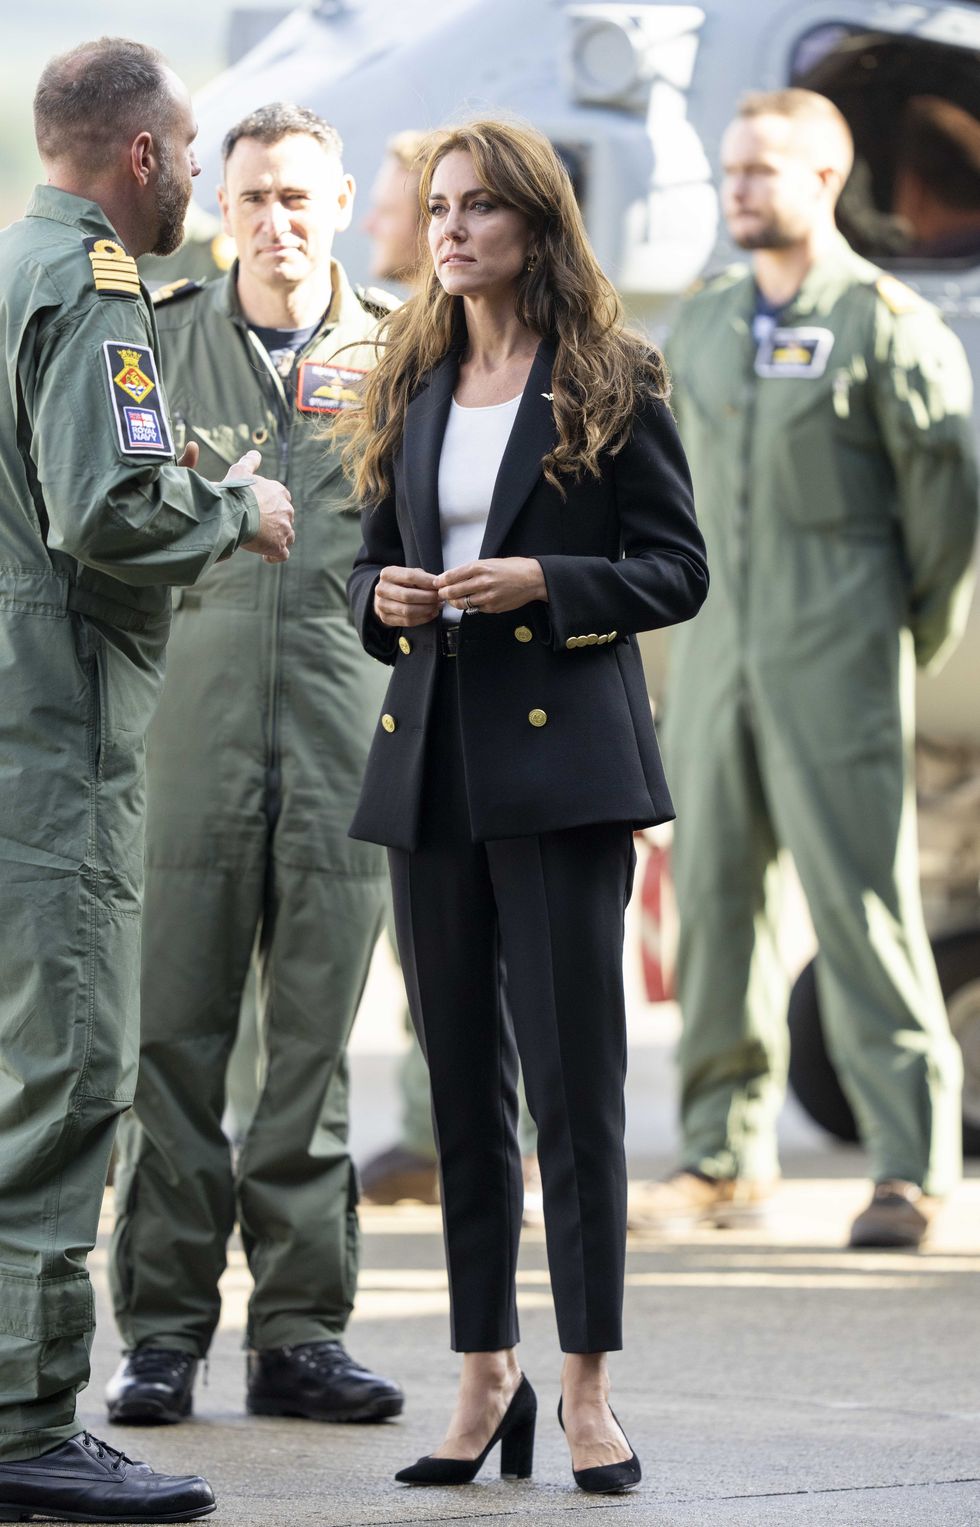 yeovil, england september 18 catherine, princess of wales during her visit to royal naval air station yeovilton on september 18, 2023 in yeovil, england the princess of wales is visiting the airbase following her appoint as commodore in chief, fleet air arm faa photo by mark cuthbertuk press via getty images